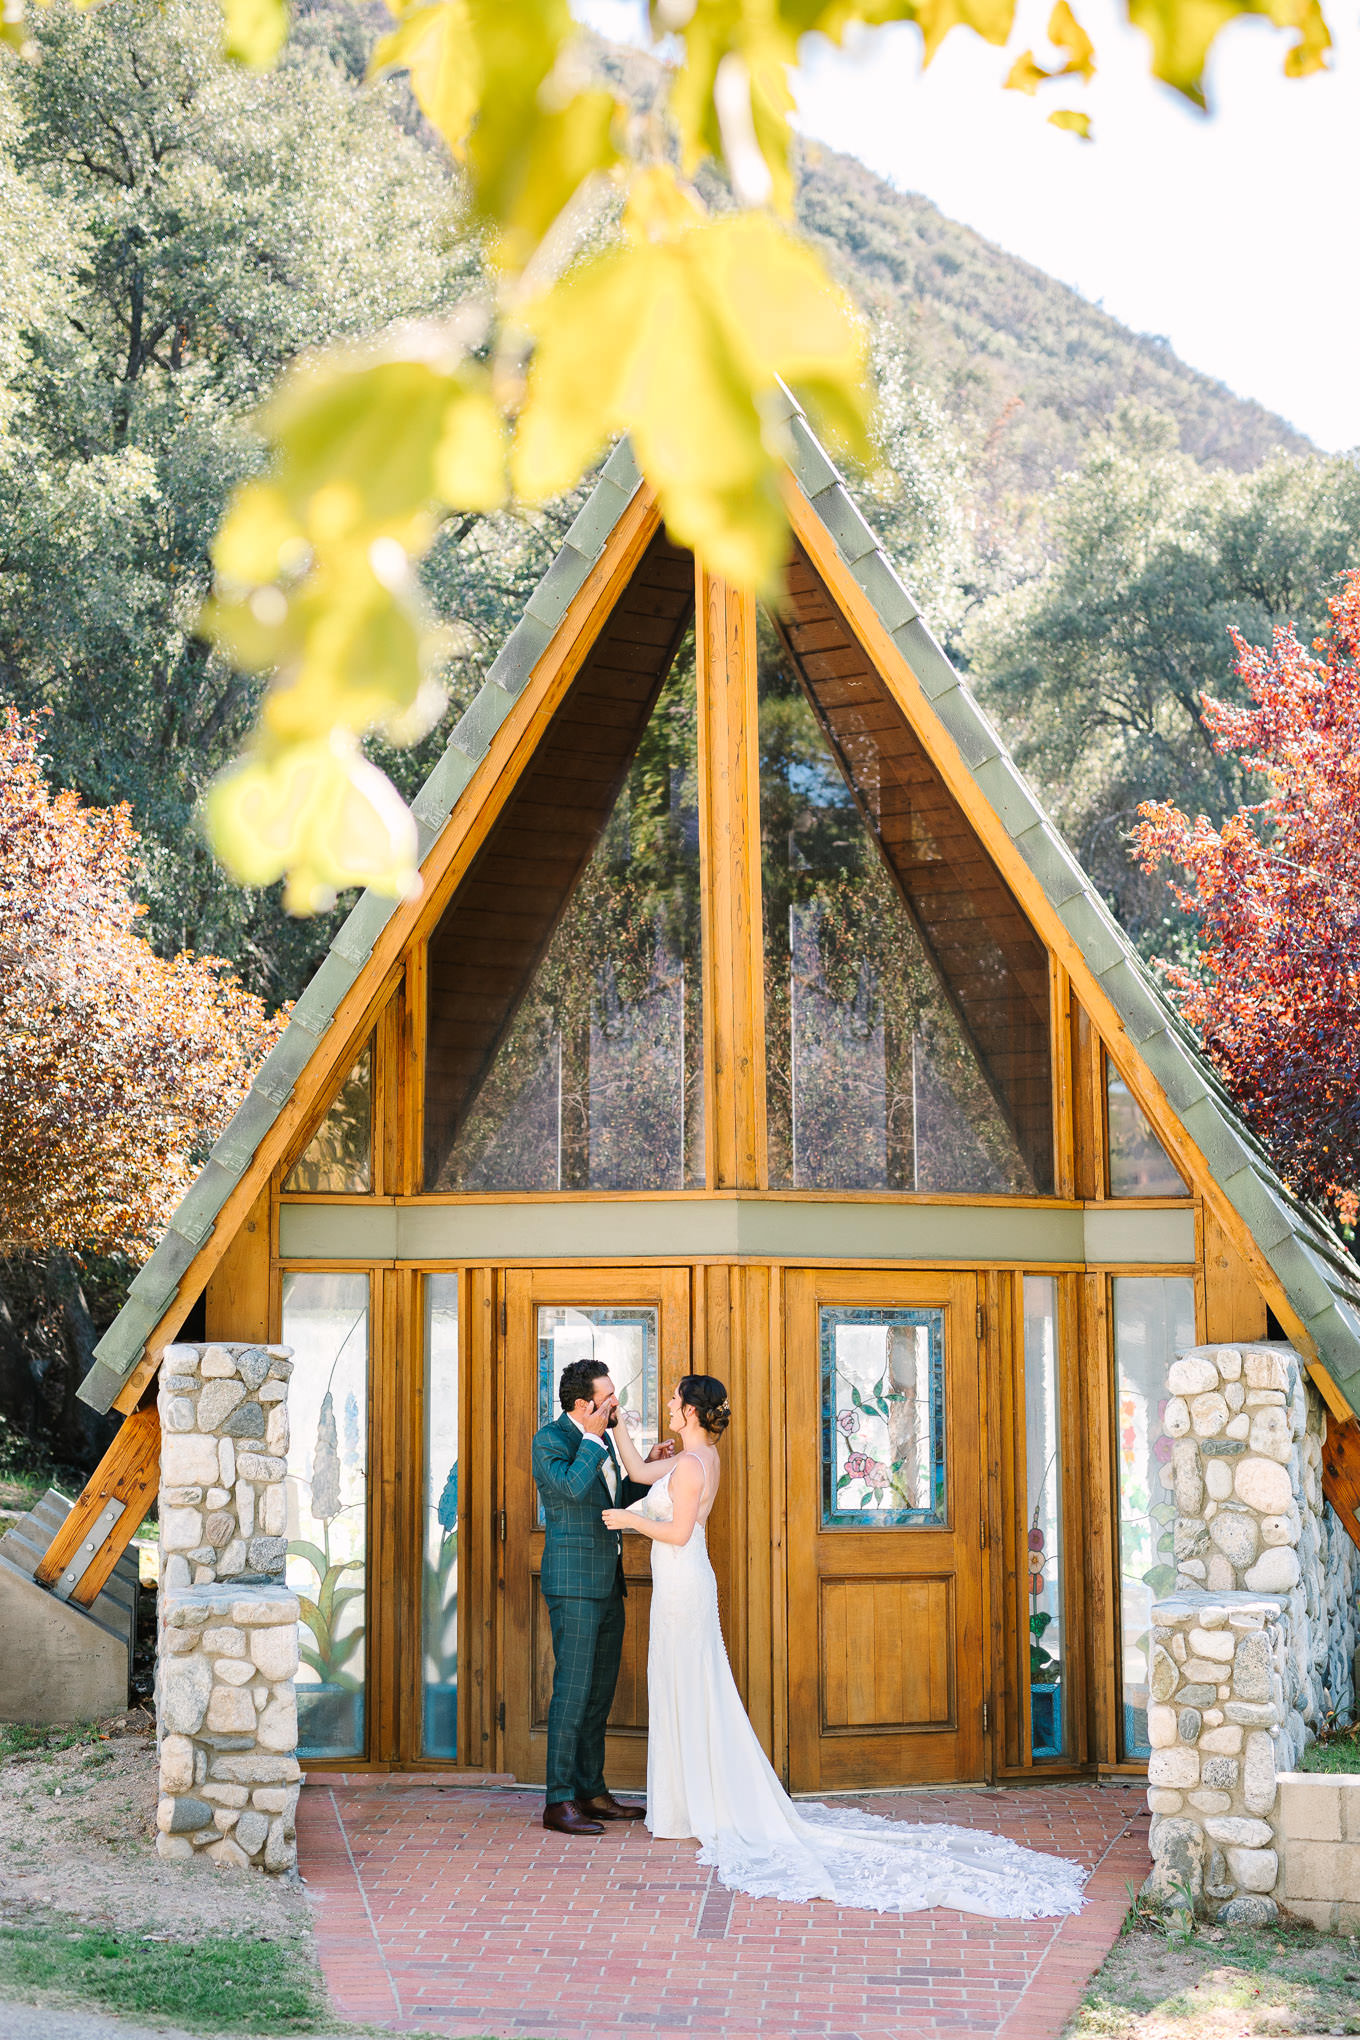 Canyon Creek Summer Camp wedding | Wedding and elopement photography roundup | Los Angeles and Palm Springs  photographer | #losangeleswedding #palmspringswedding #elopementphotographer

Source: Mary Costa Photography | Los Angeles